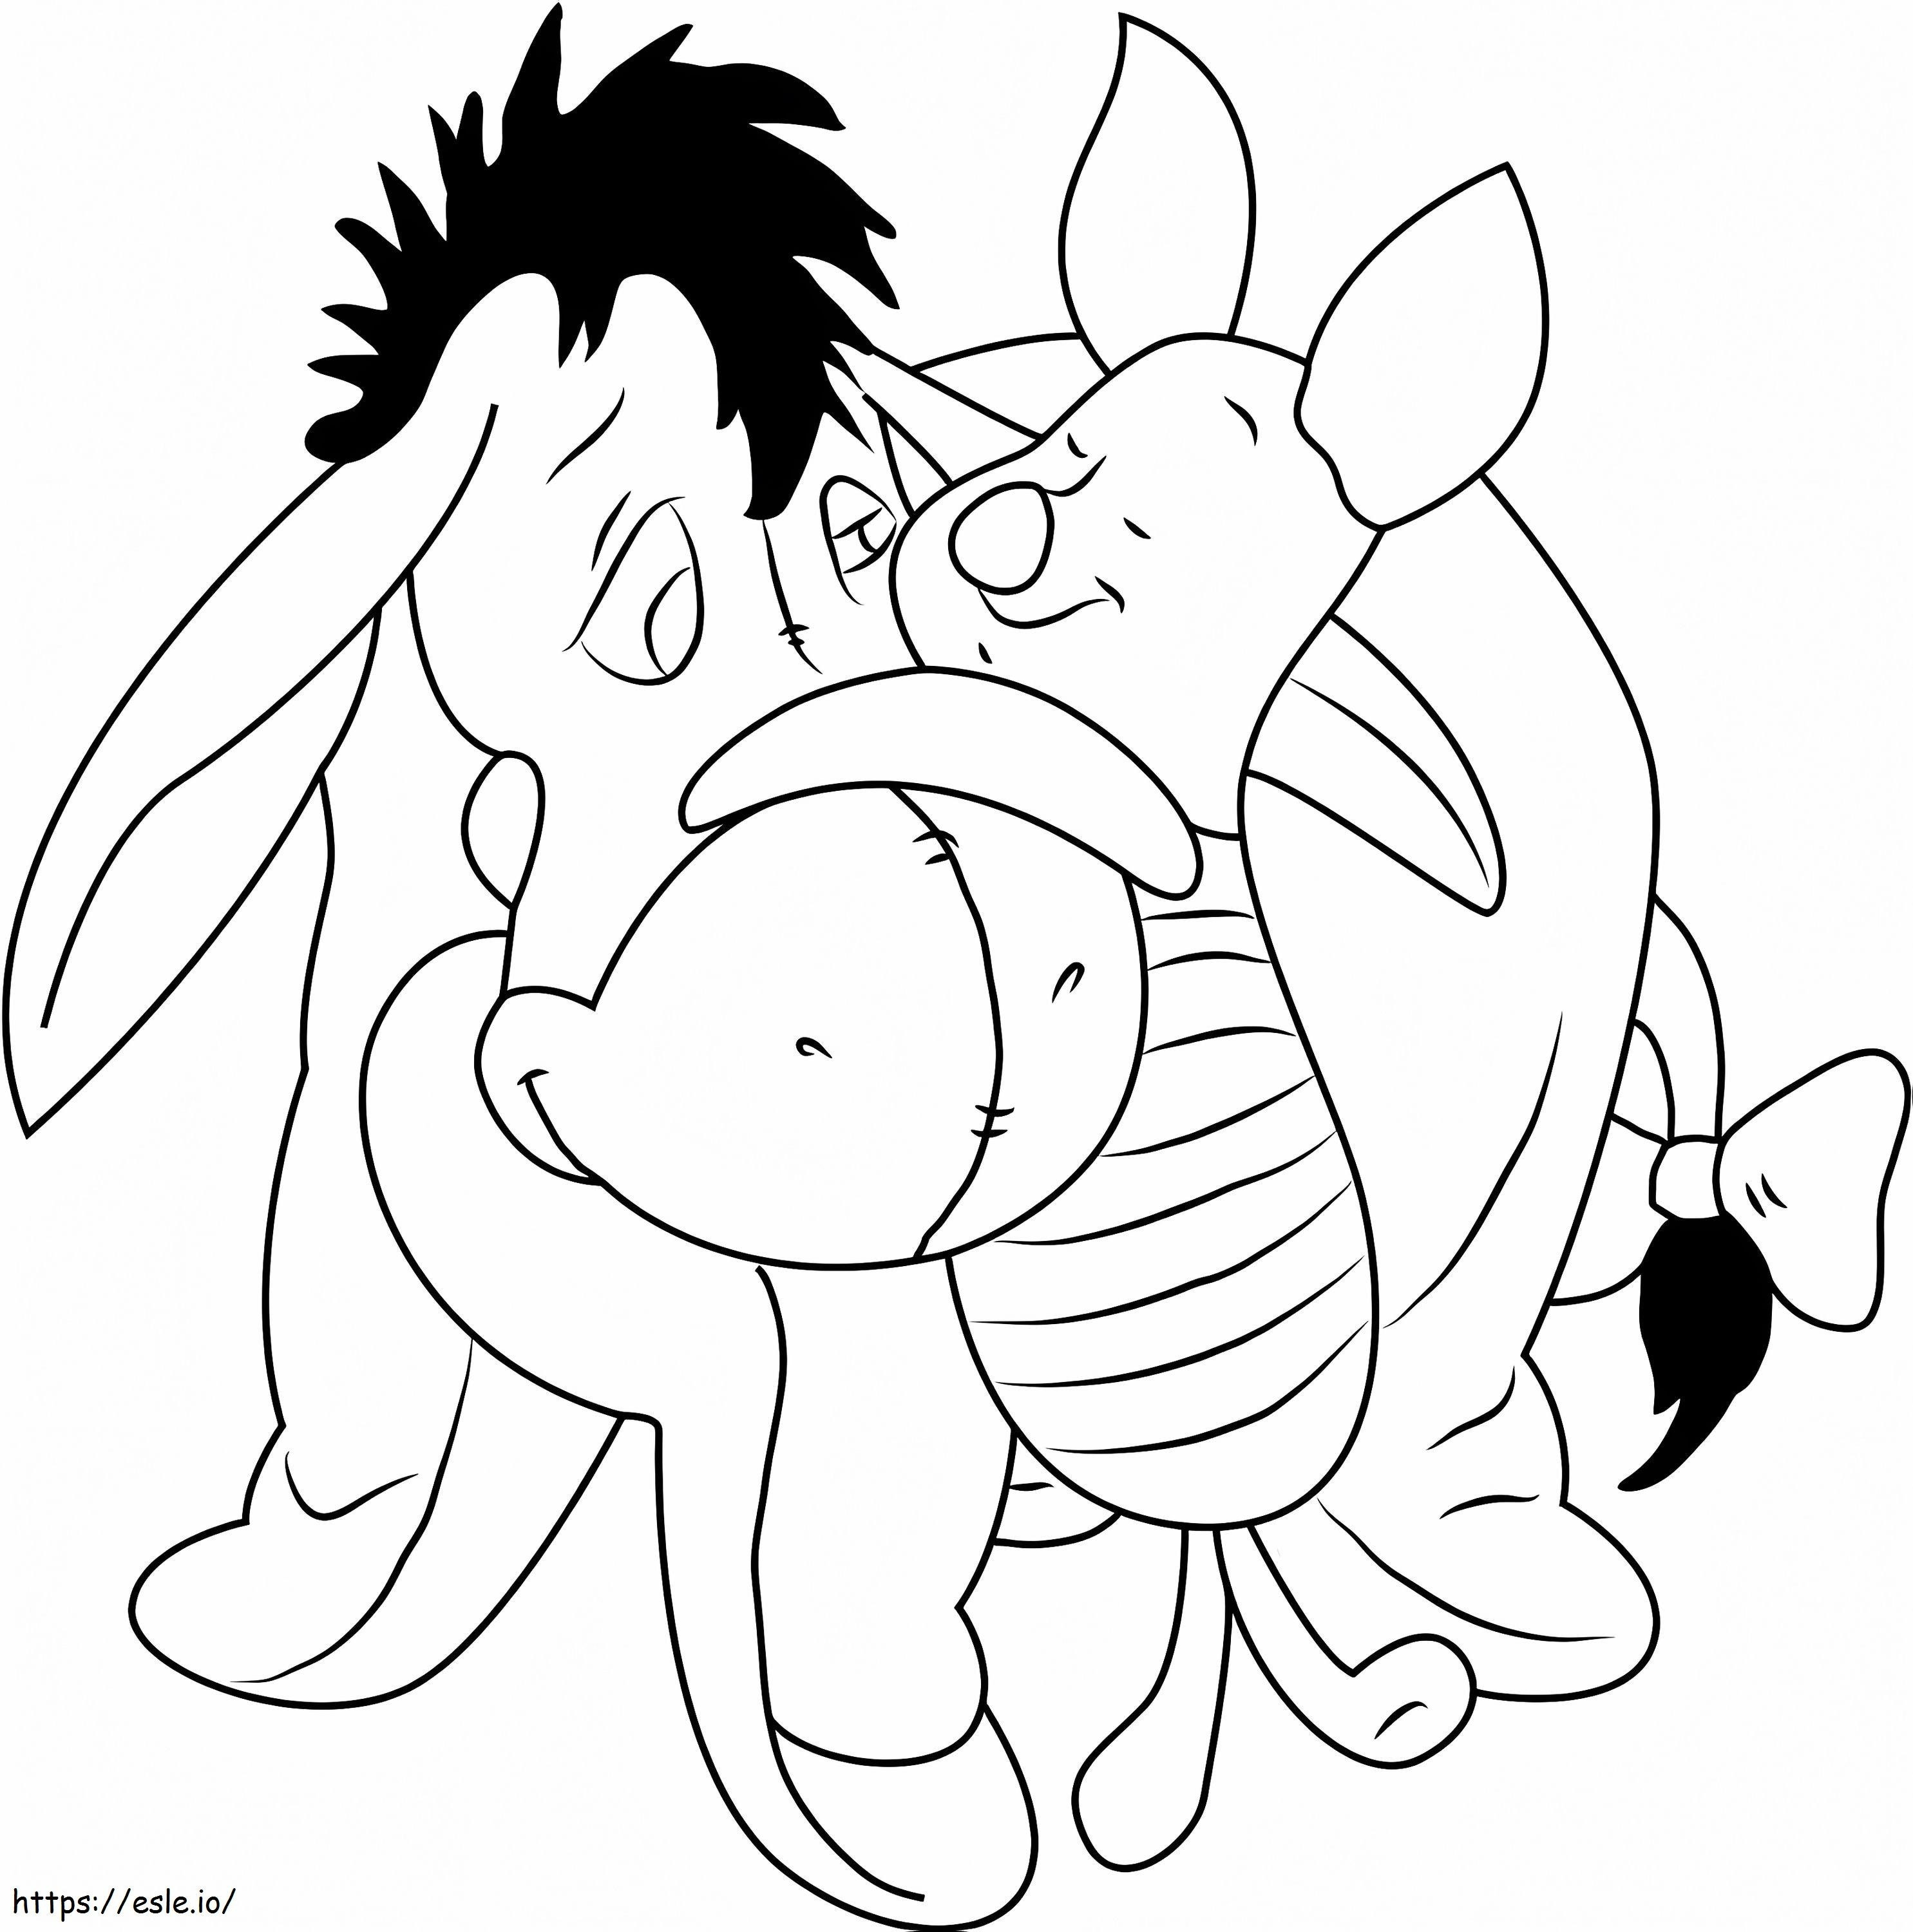 Piglet And Friend coloring page